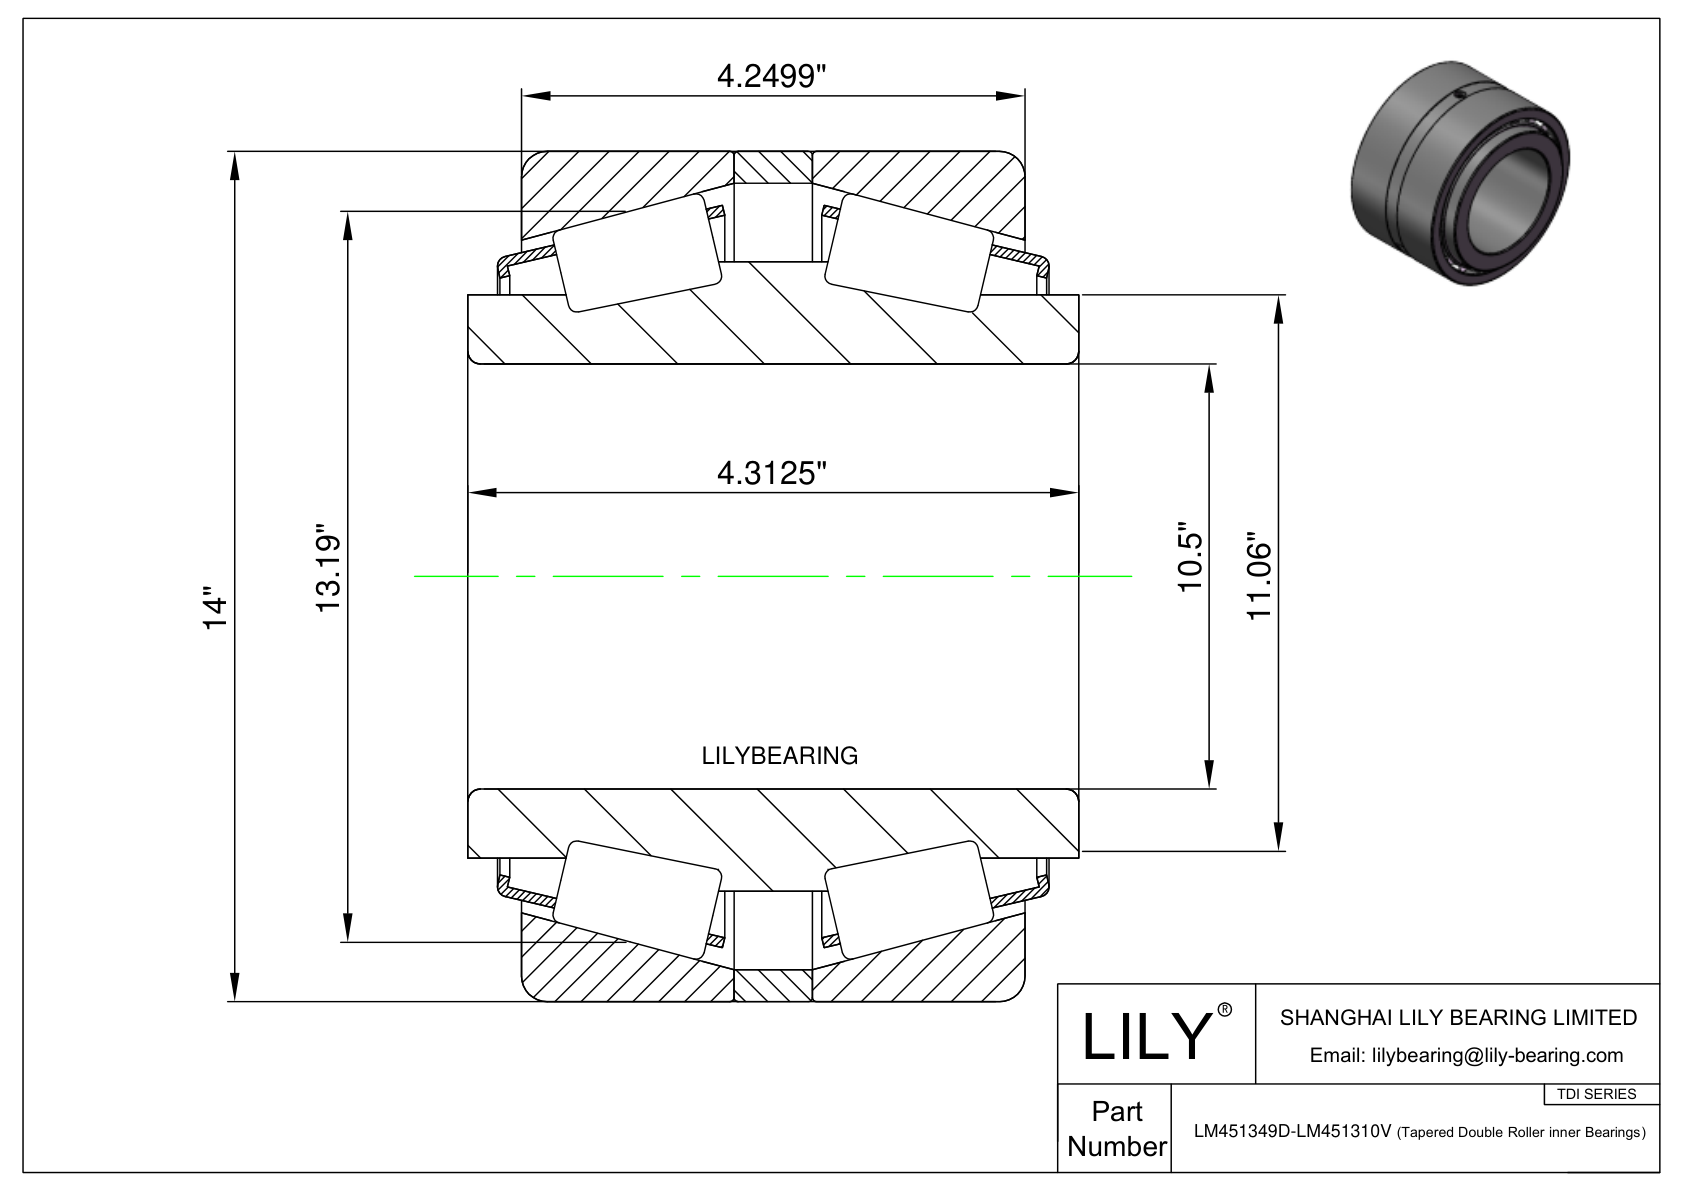 LM451349D-LM451310V TDI (Two-Row Double Inner Race) (Imperial) cad drawing